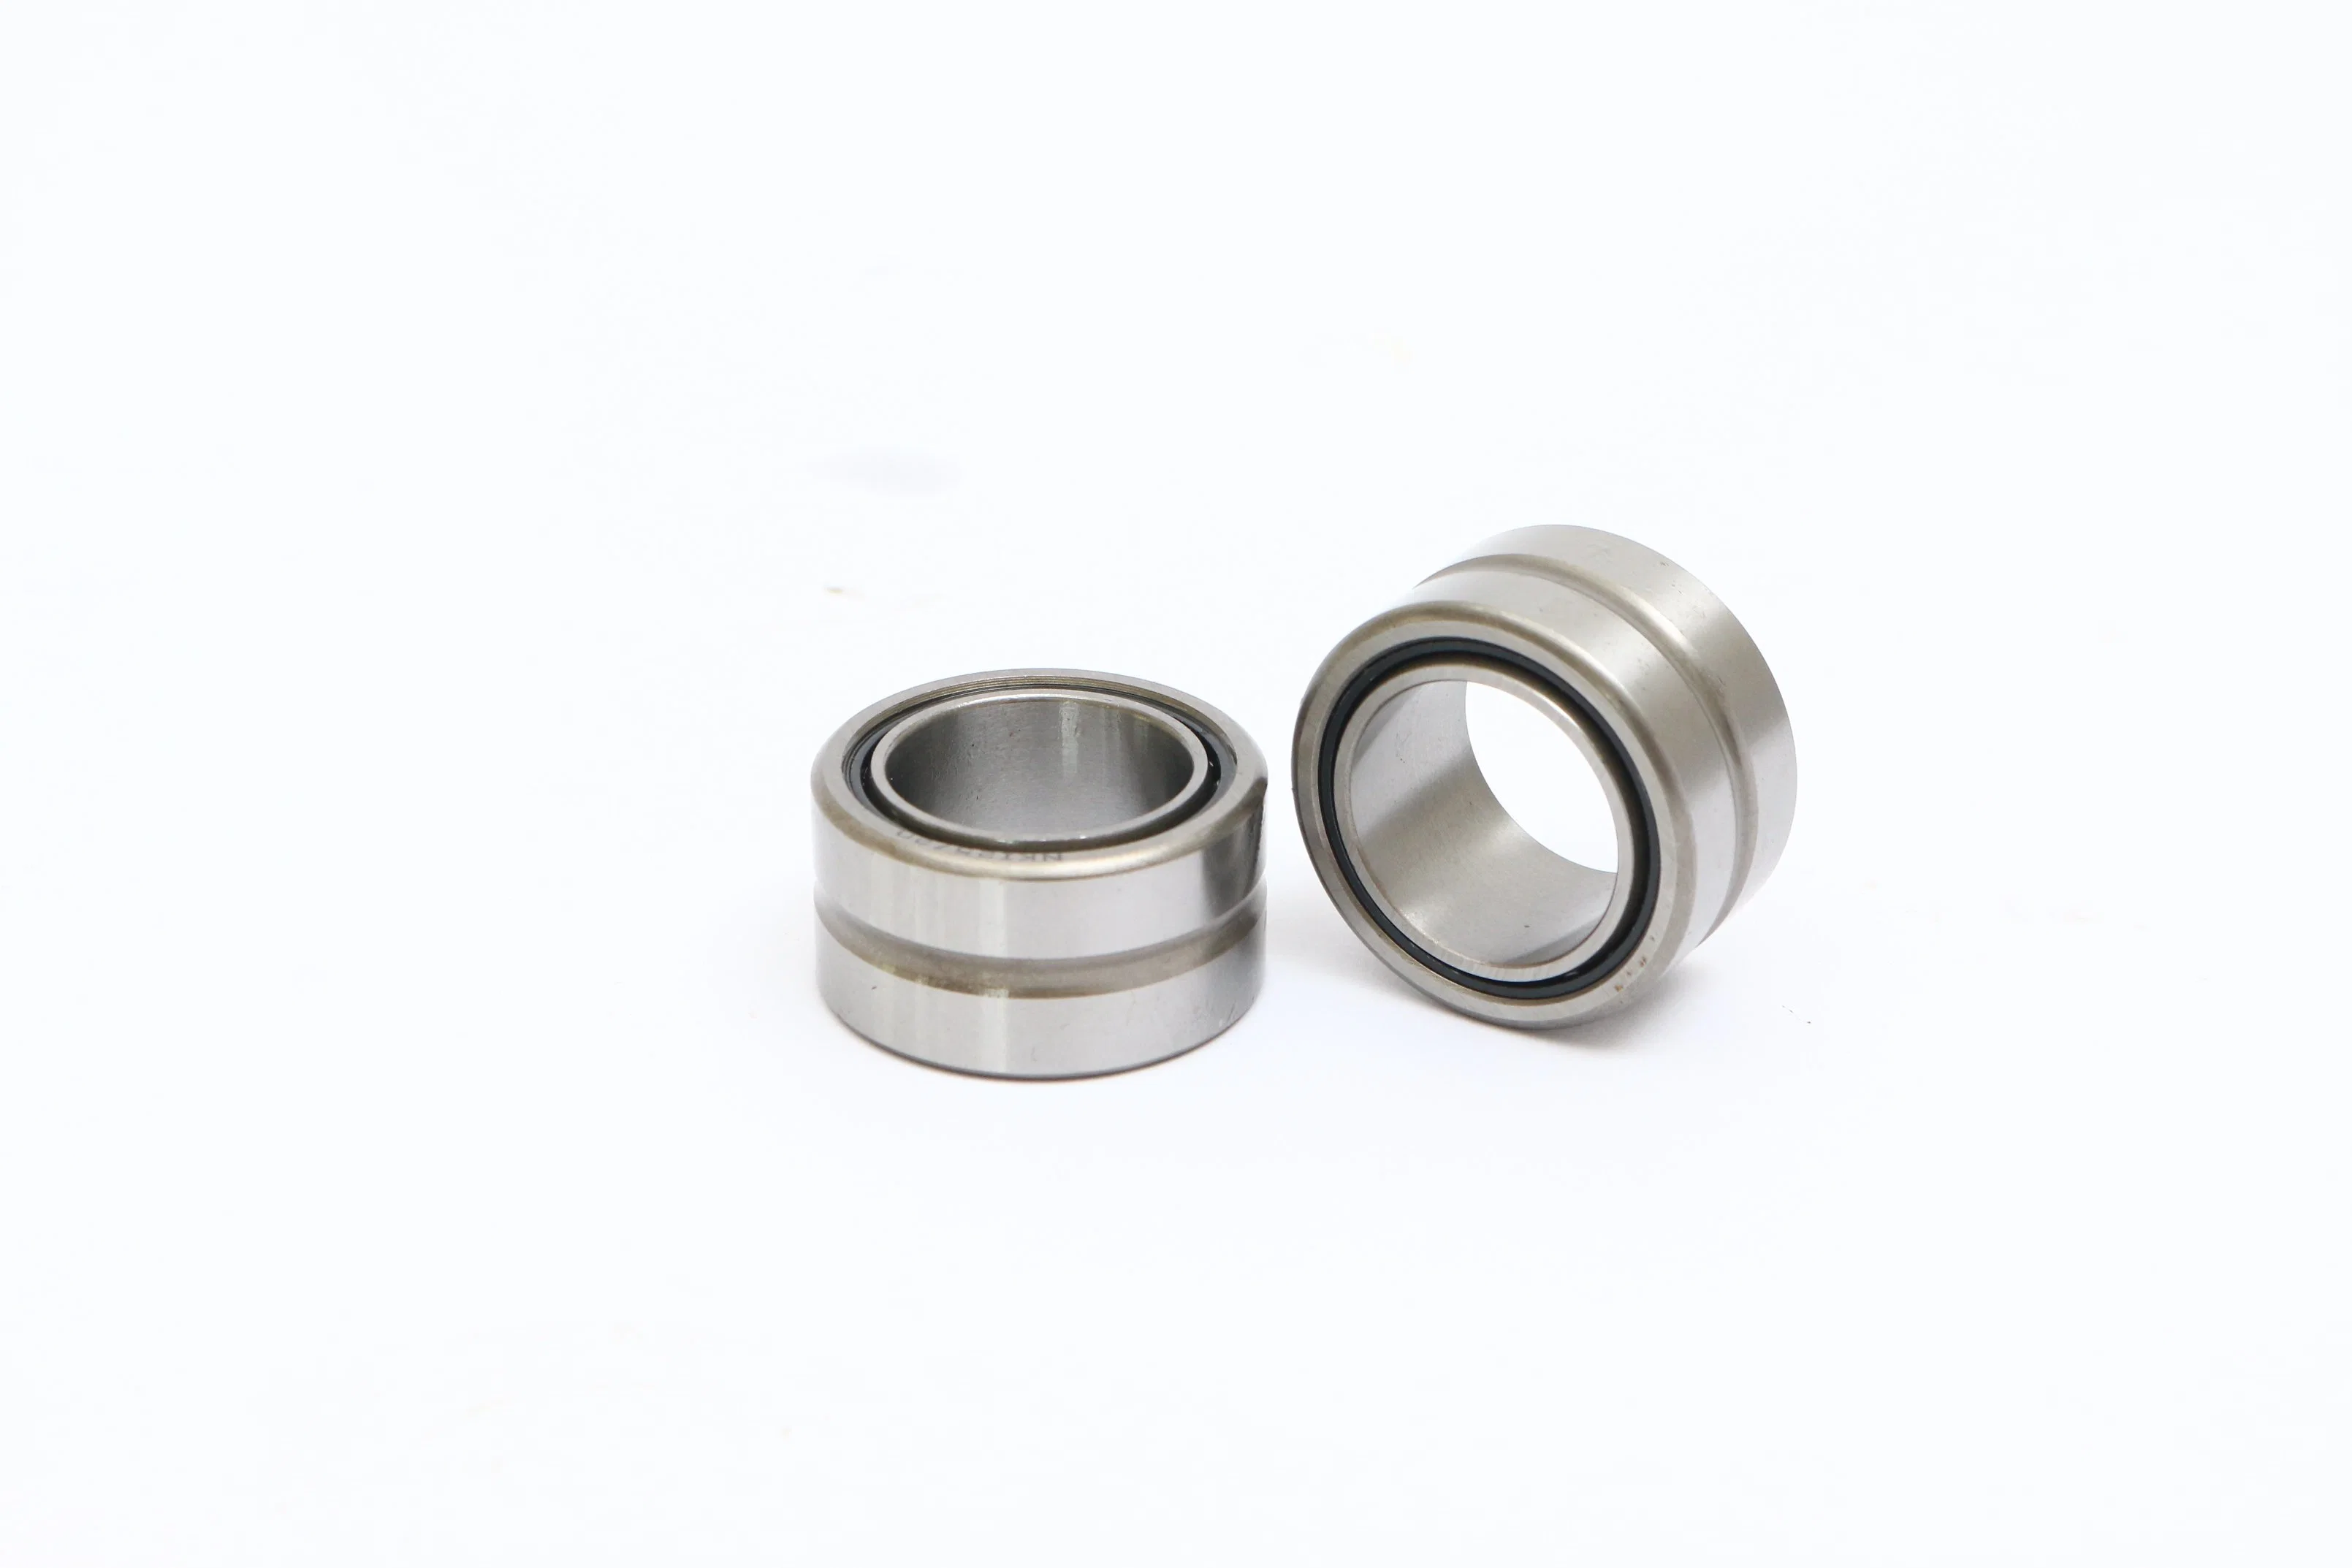 China Supplier Auto Motorcycle Car All Type of Pillow Block Housing Magnetic Wheel Hub Clutch Release Tapered Roller Bearing Deep Groove Ball Bearing